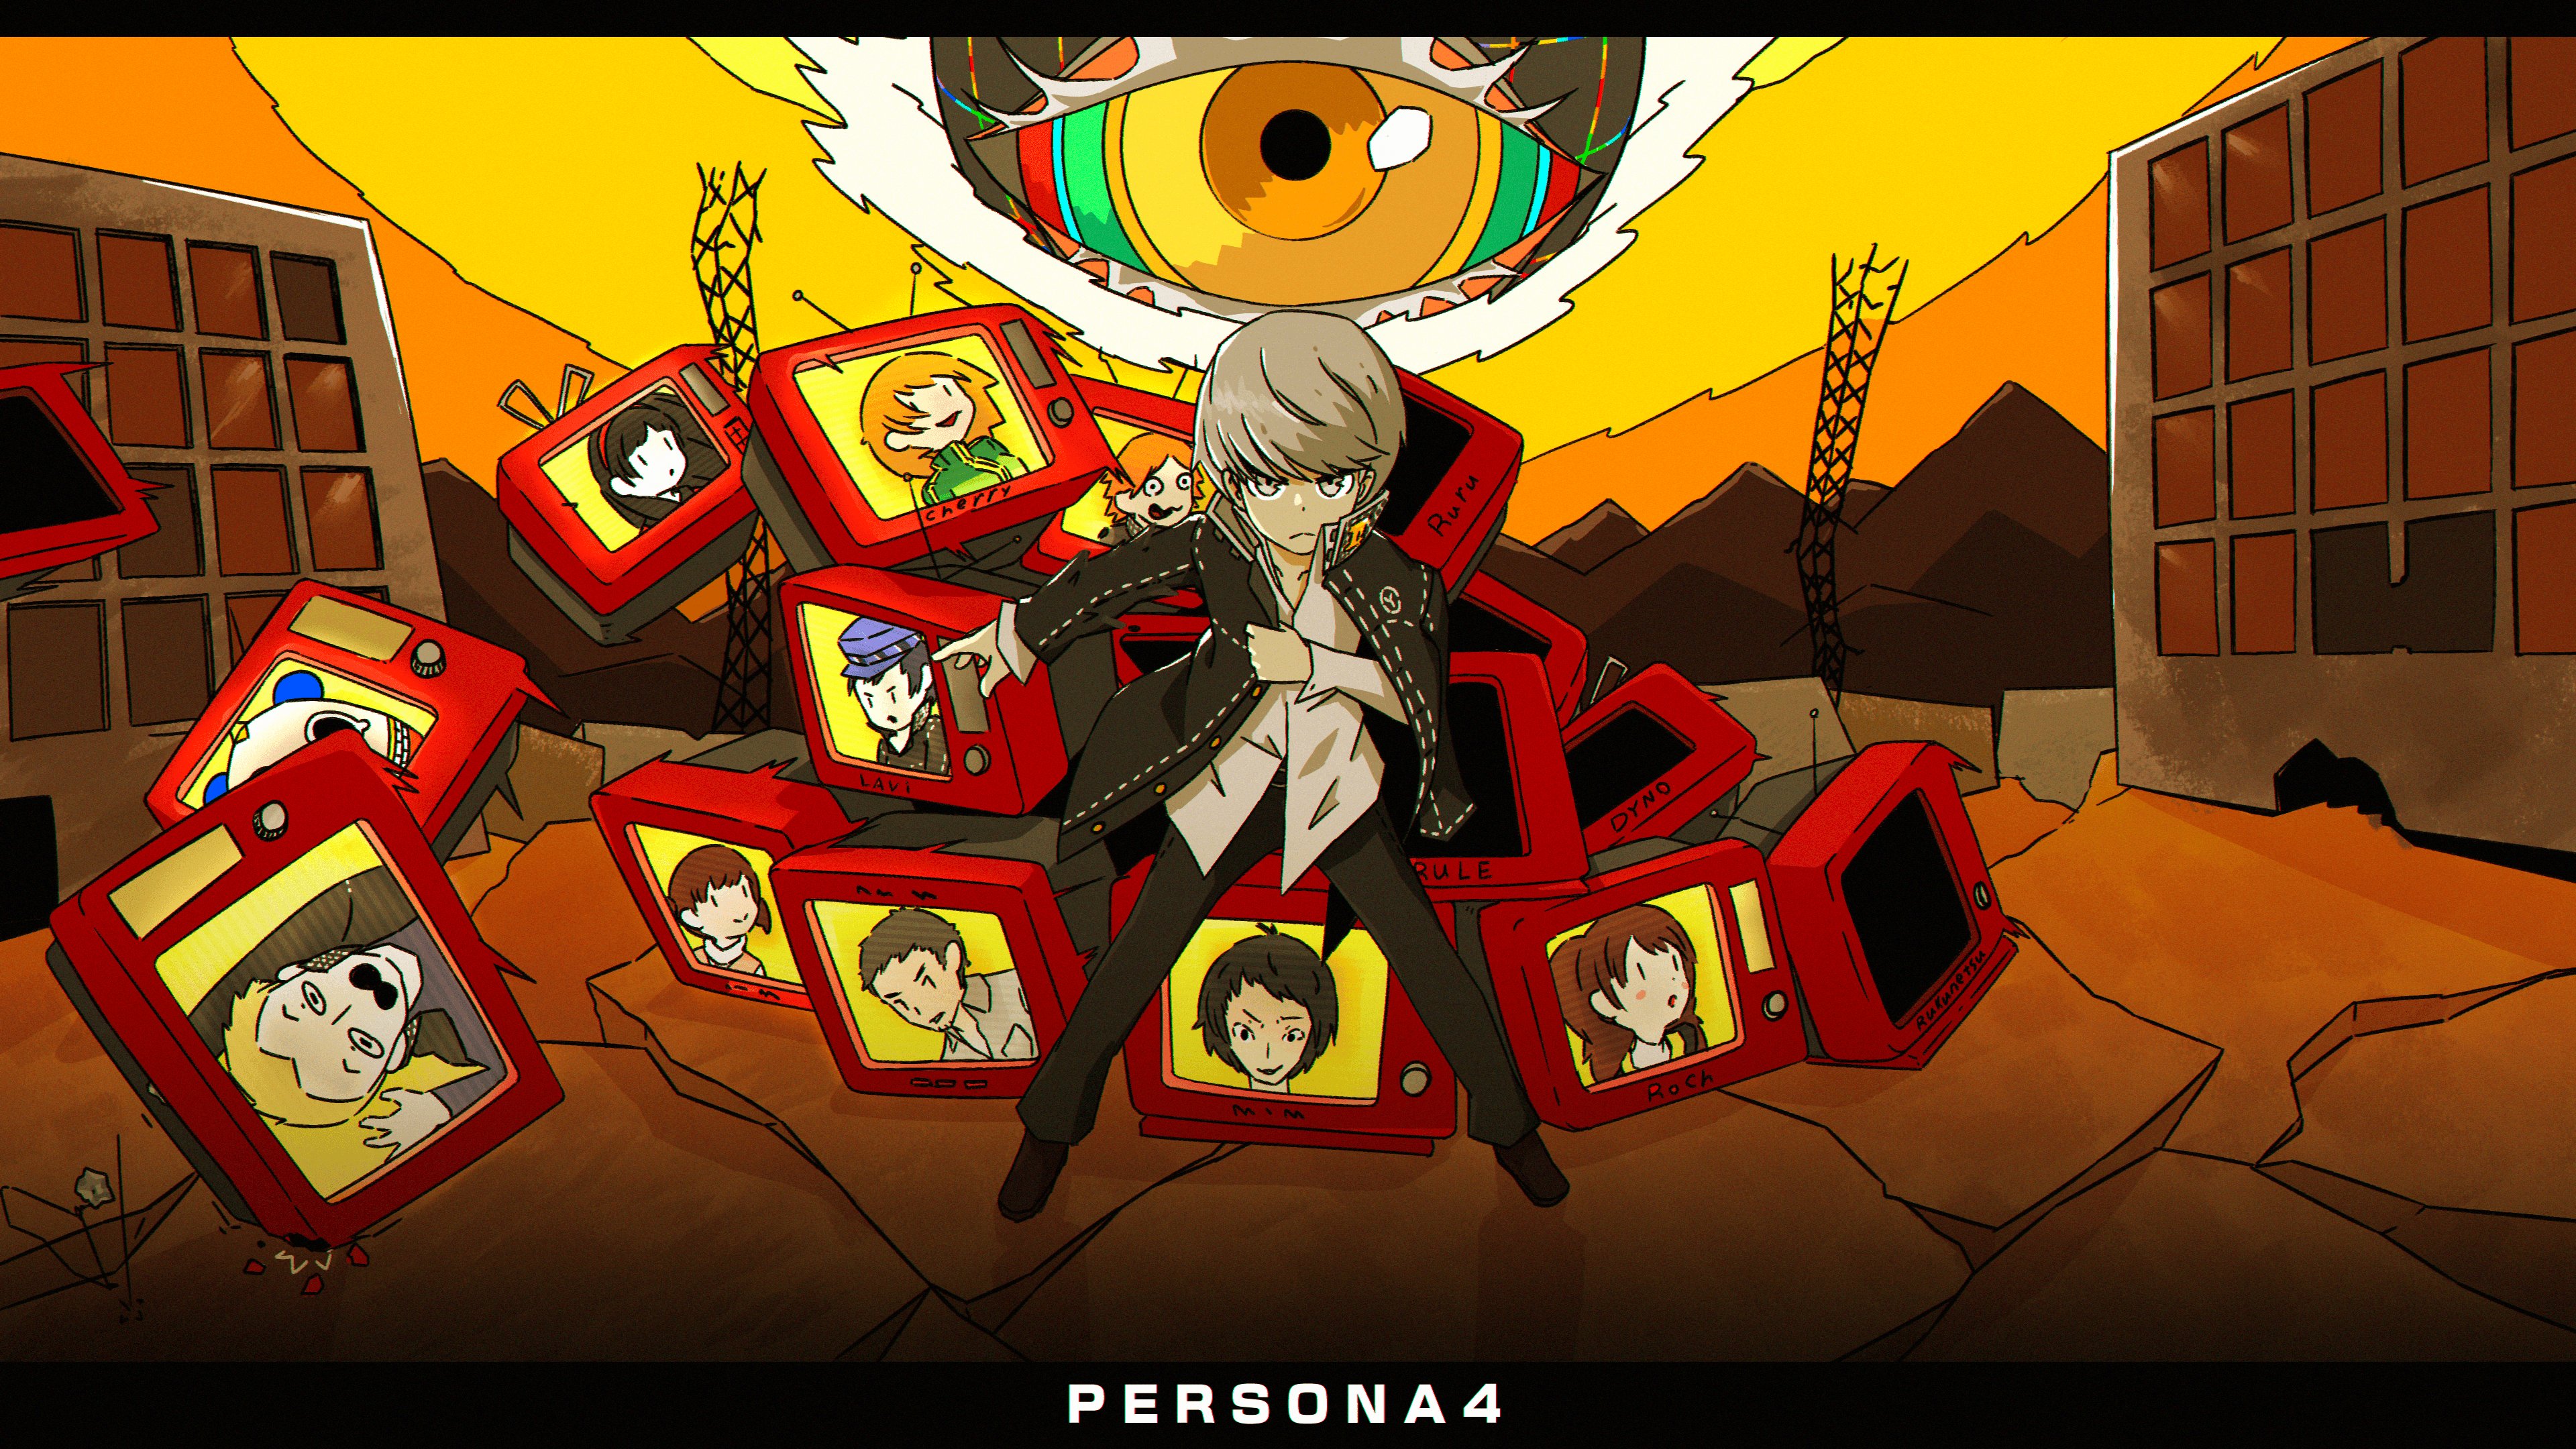 Persona 4 Chie Satonaka Persona Series Video Game Characters Anime Girls Anime Boys TV Looking At Vi 3840x2160